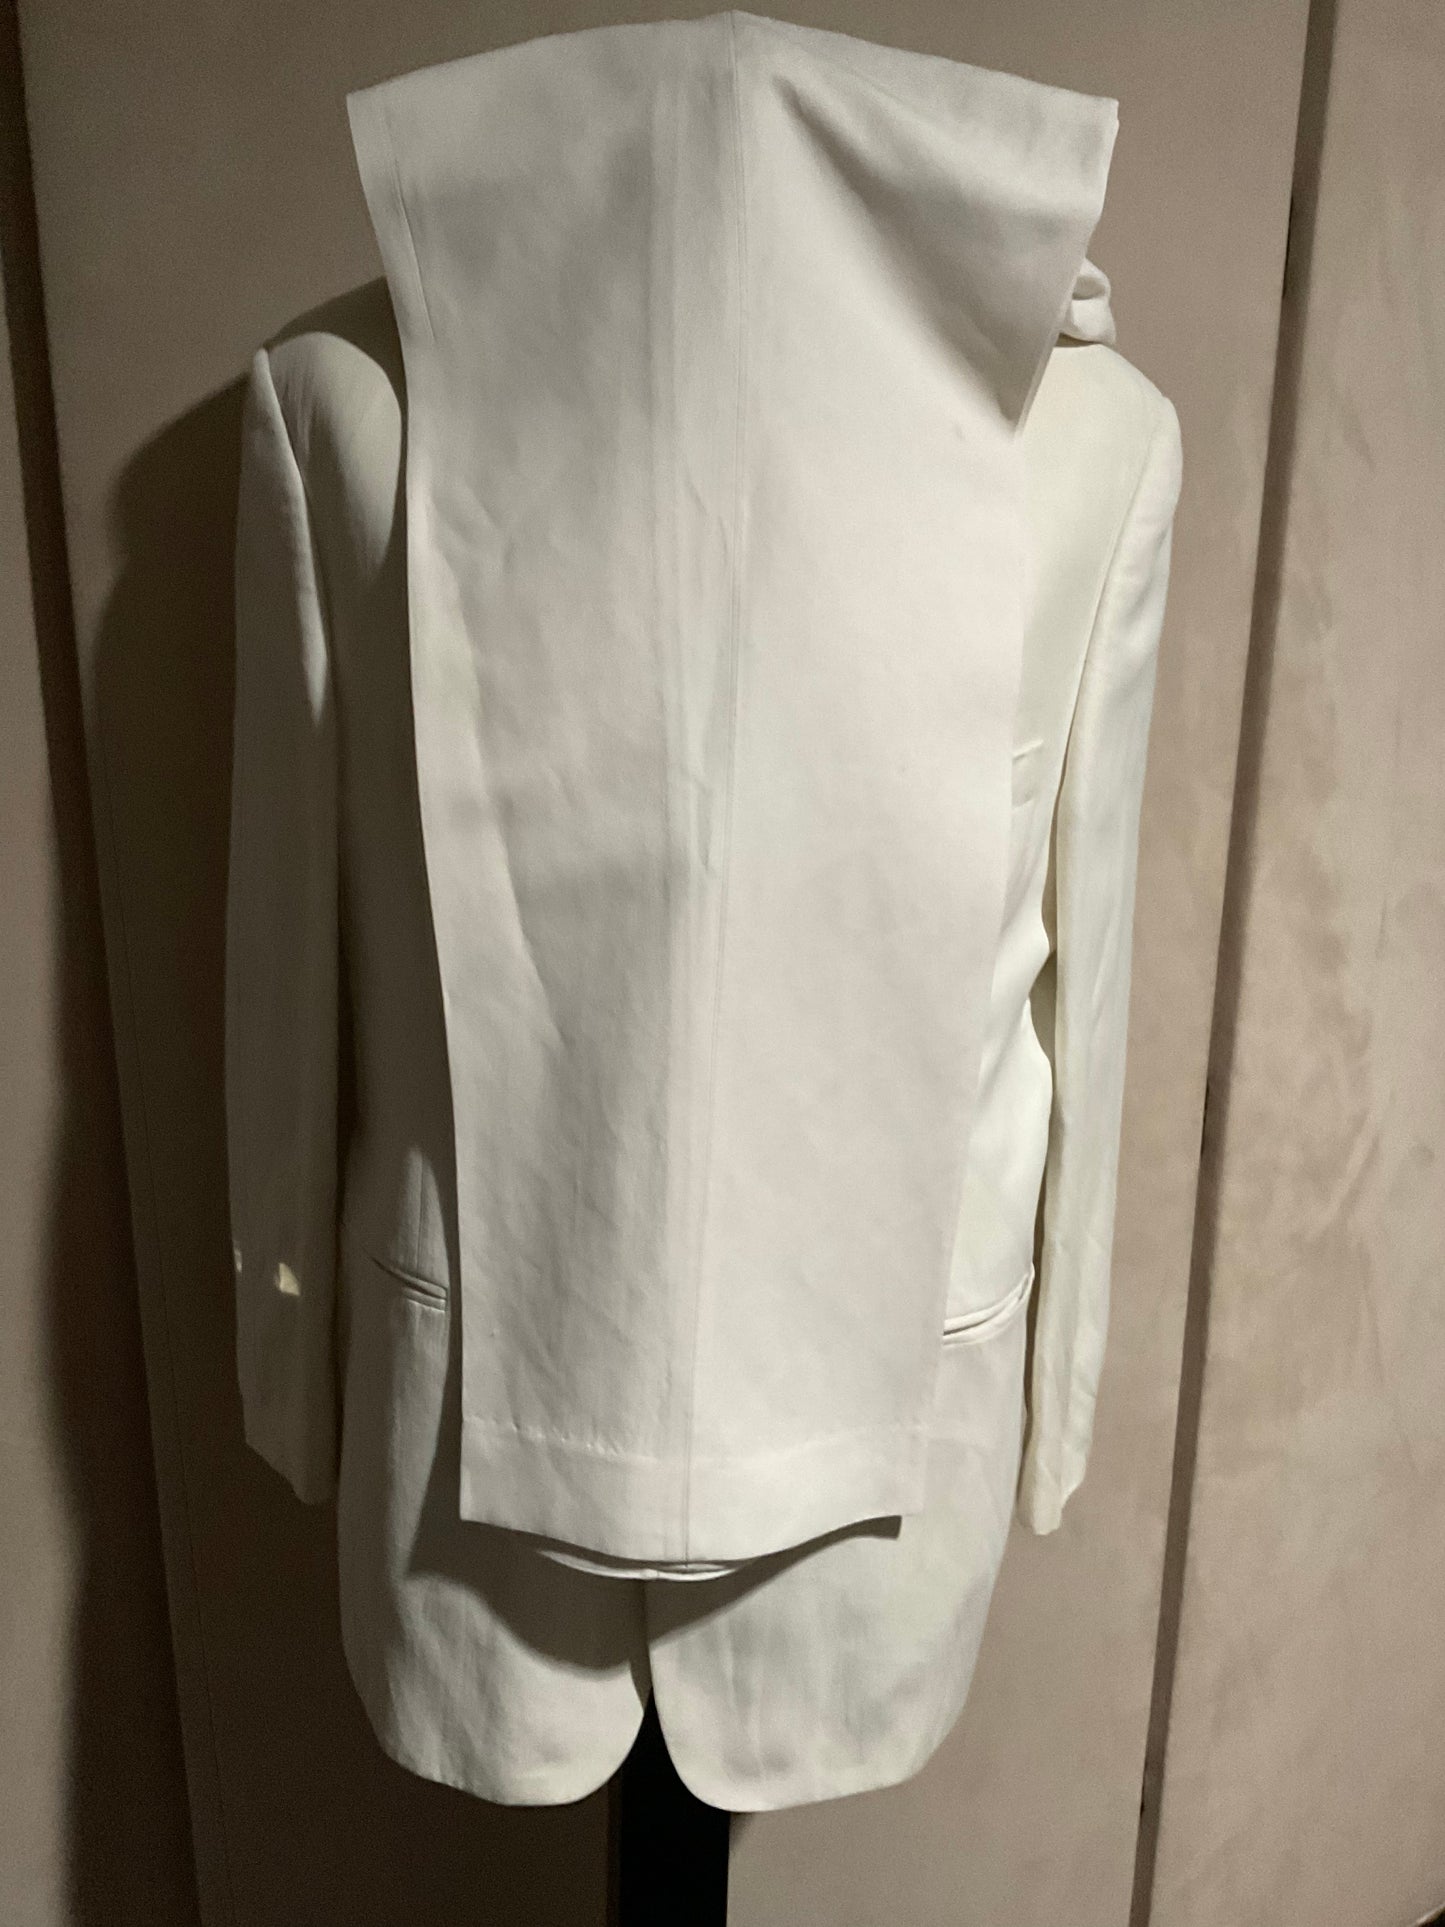 R P SUIT / WHITE LINEN / 4 BUTTON / 40 REG / MADE IN CANADA